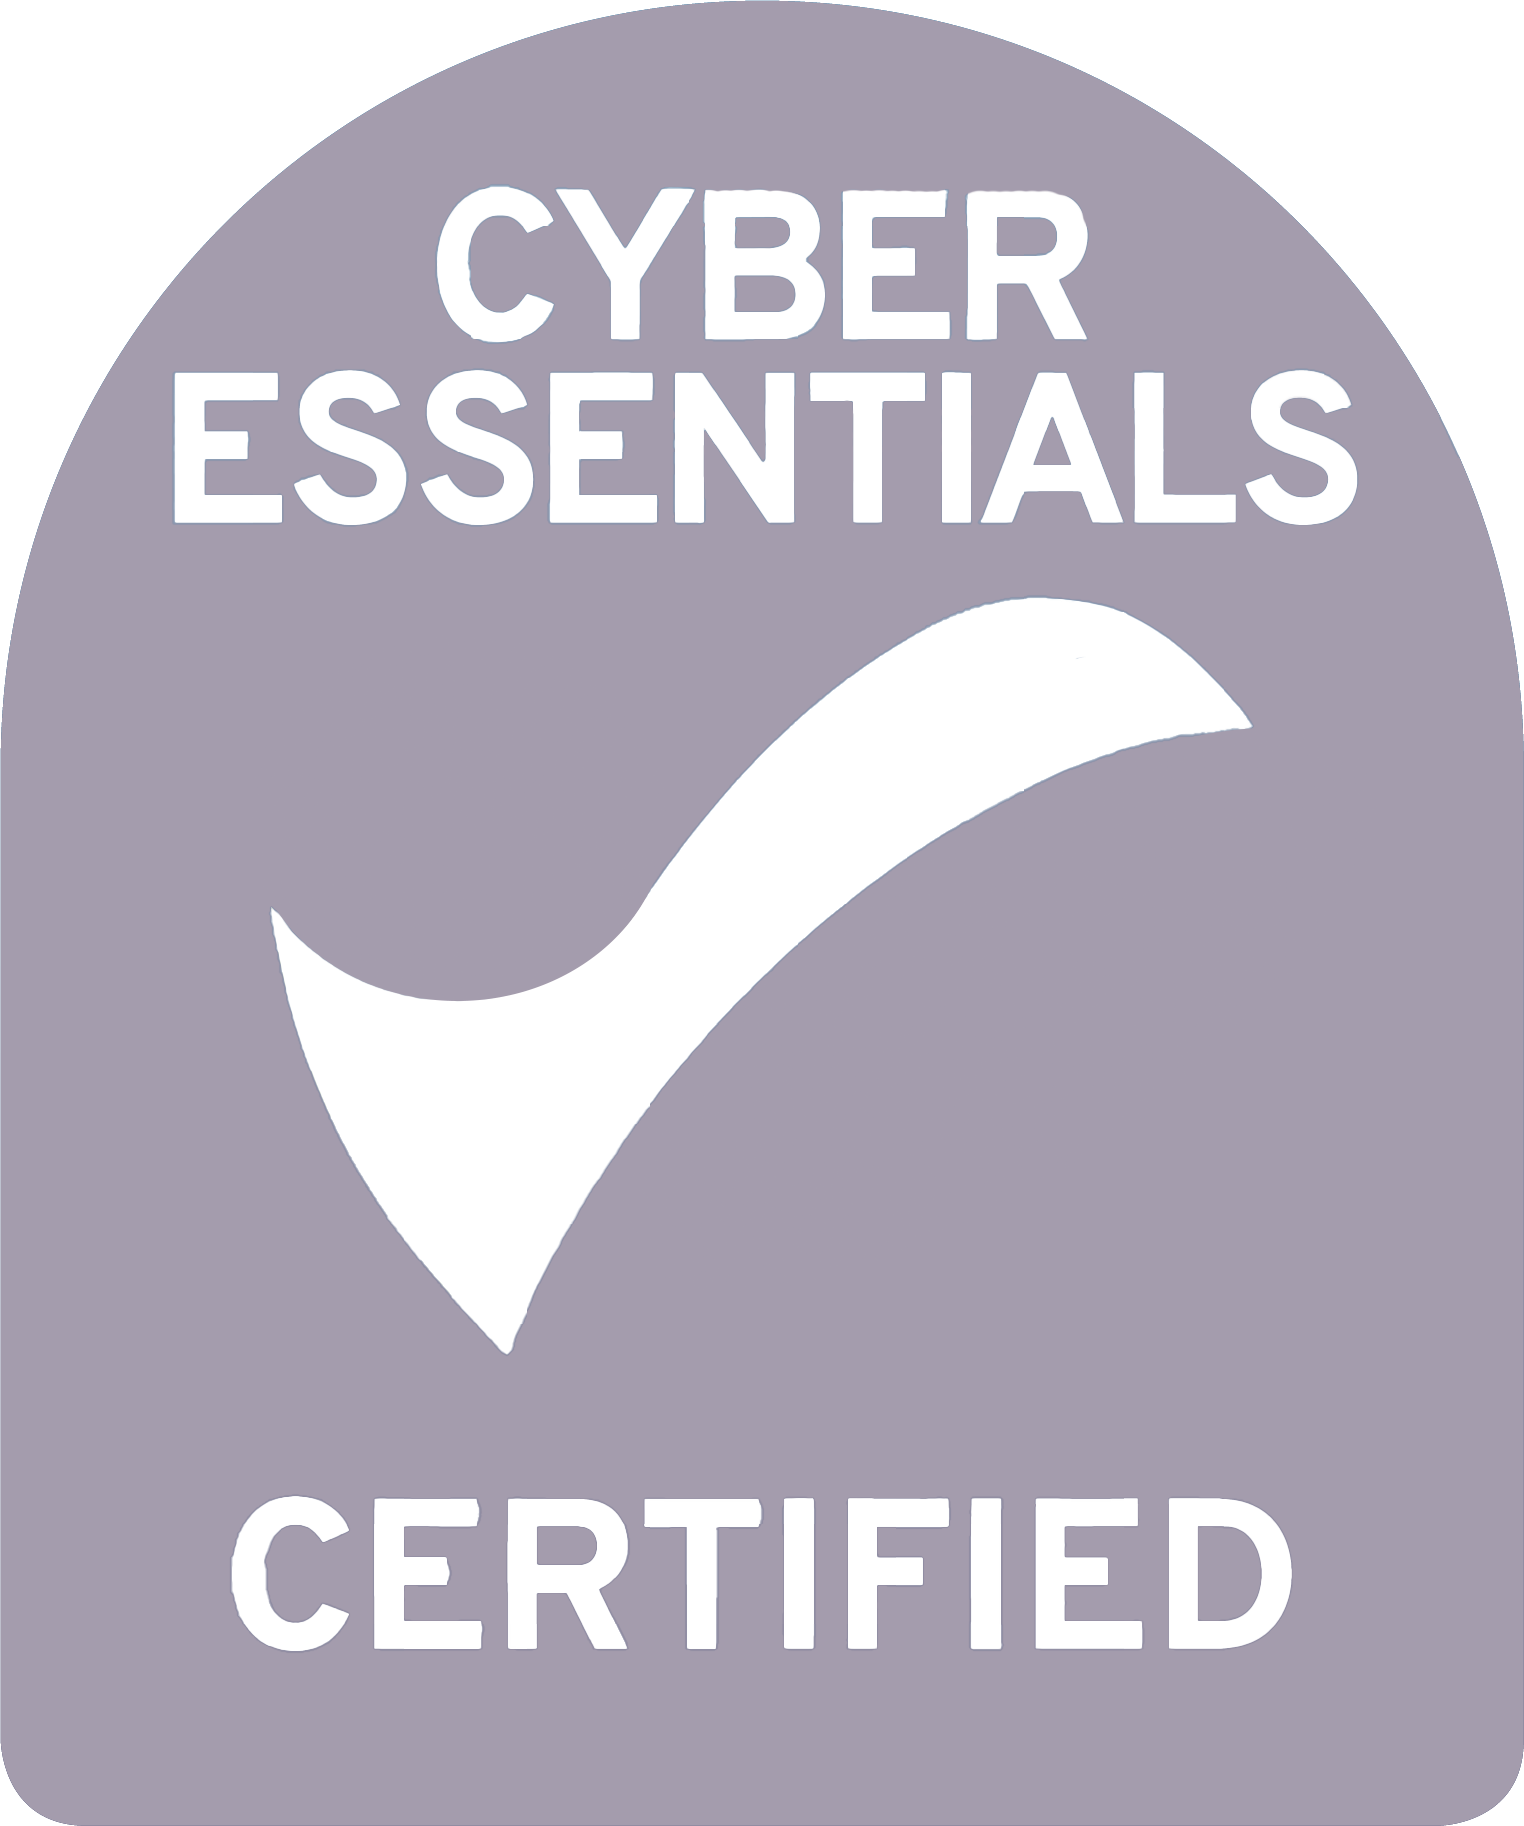 Kitemark for a Successfully Certified Cyber Essentials Organisation. Ionburst Limited is Cyber Essentials Certified.